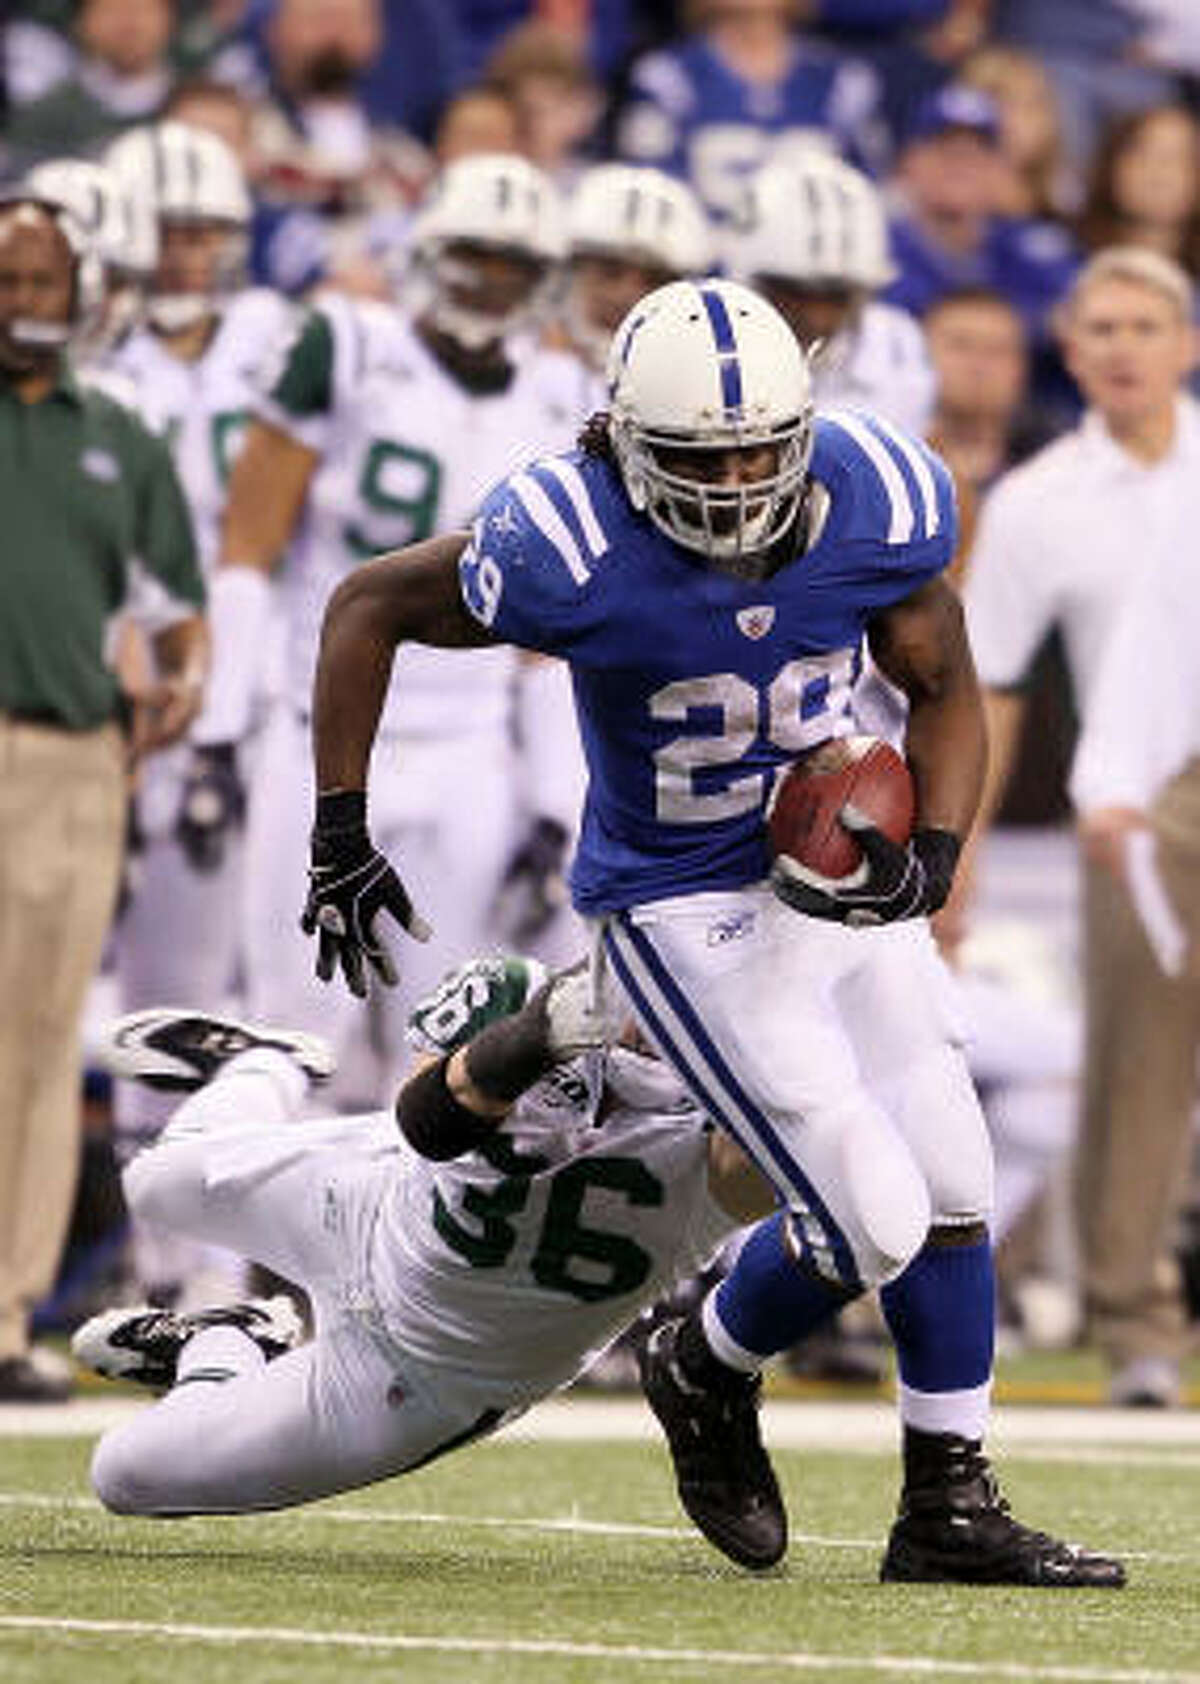 Joseph Addai Position: Running back Comment: Sharpstown product is leading rusher for Colts with 828 yards, scored 10 TDs. Also caught 51 passes and scored three times ... Averaging only 3.8 yards per rush in postseason, but against top defenses of Baltimore and New York ... Set Super Bowl reception mark for RB with 10 for 66 yards in 2007 ... First-round pick in 2006.